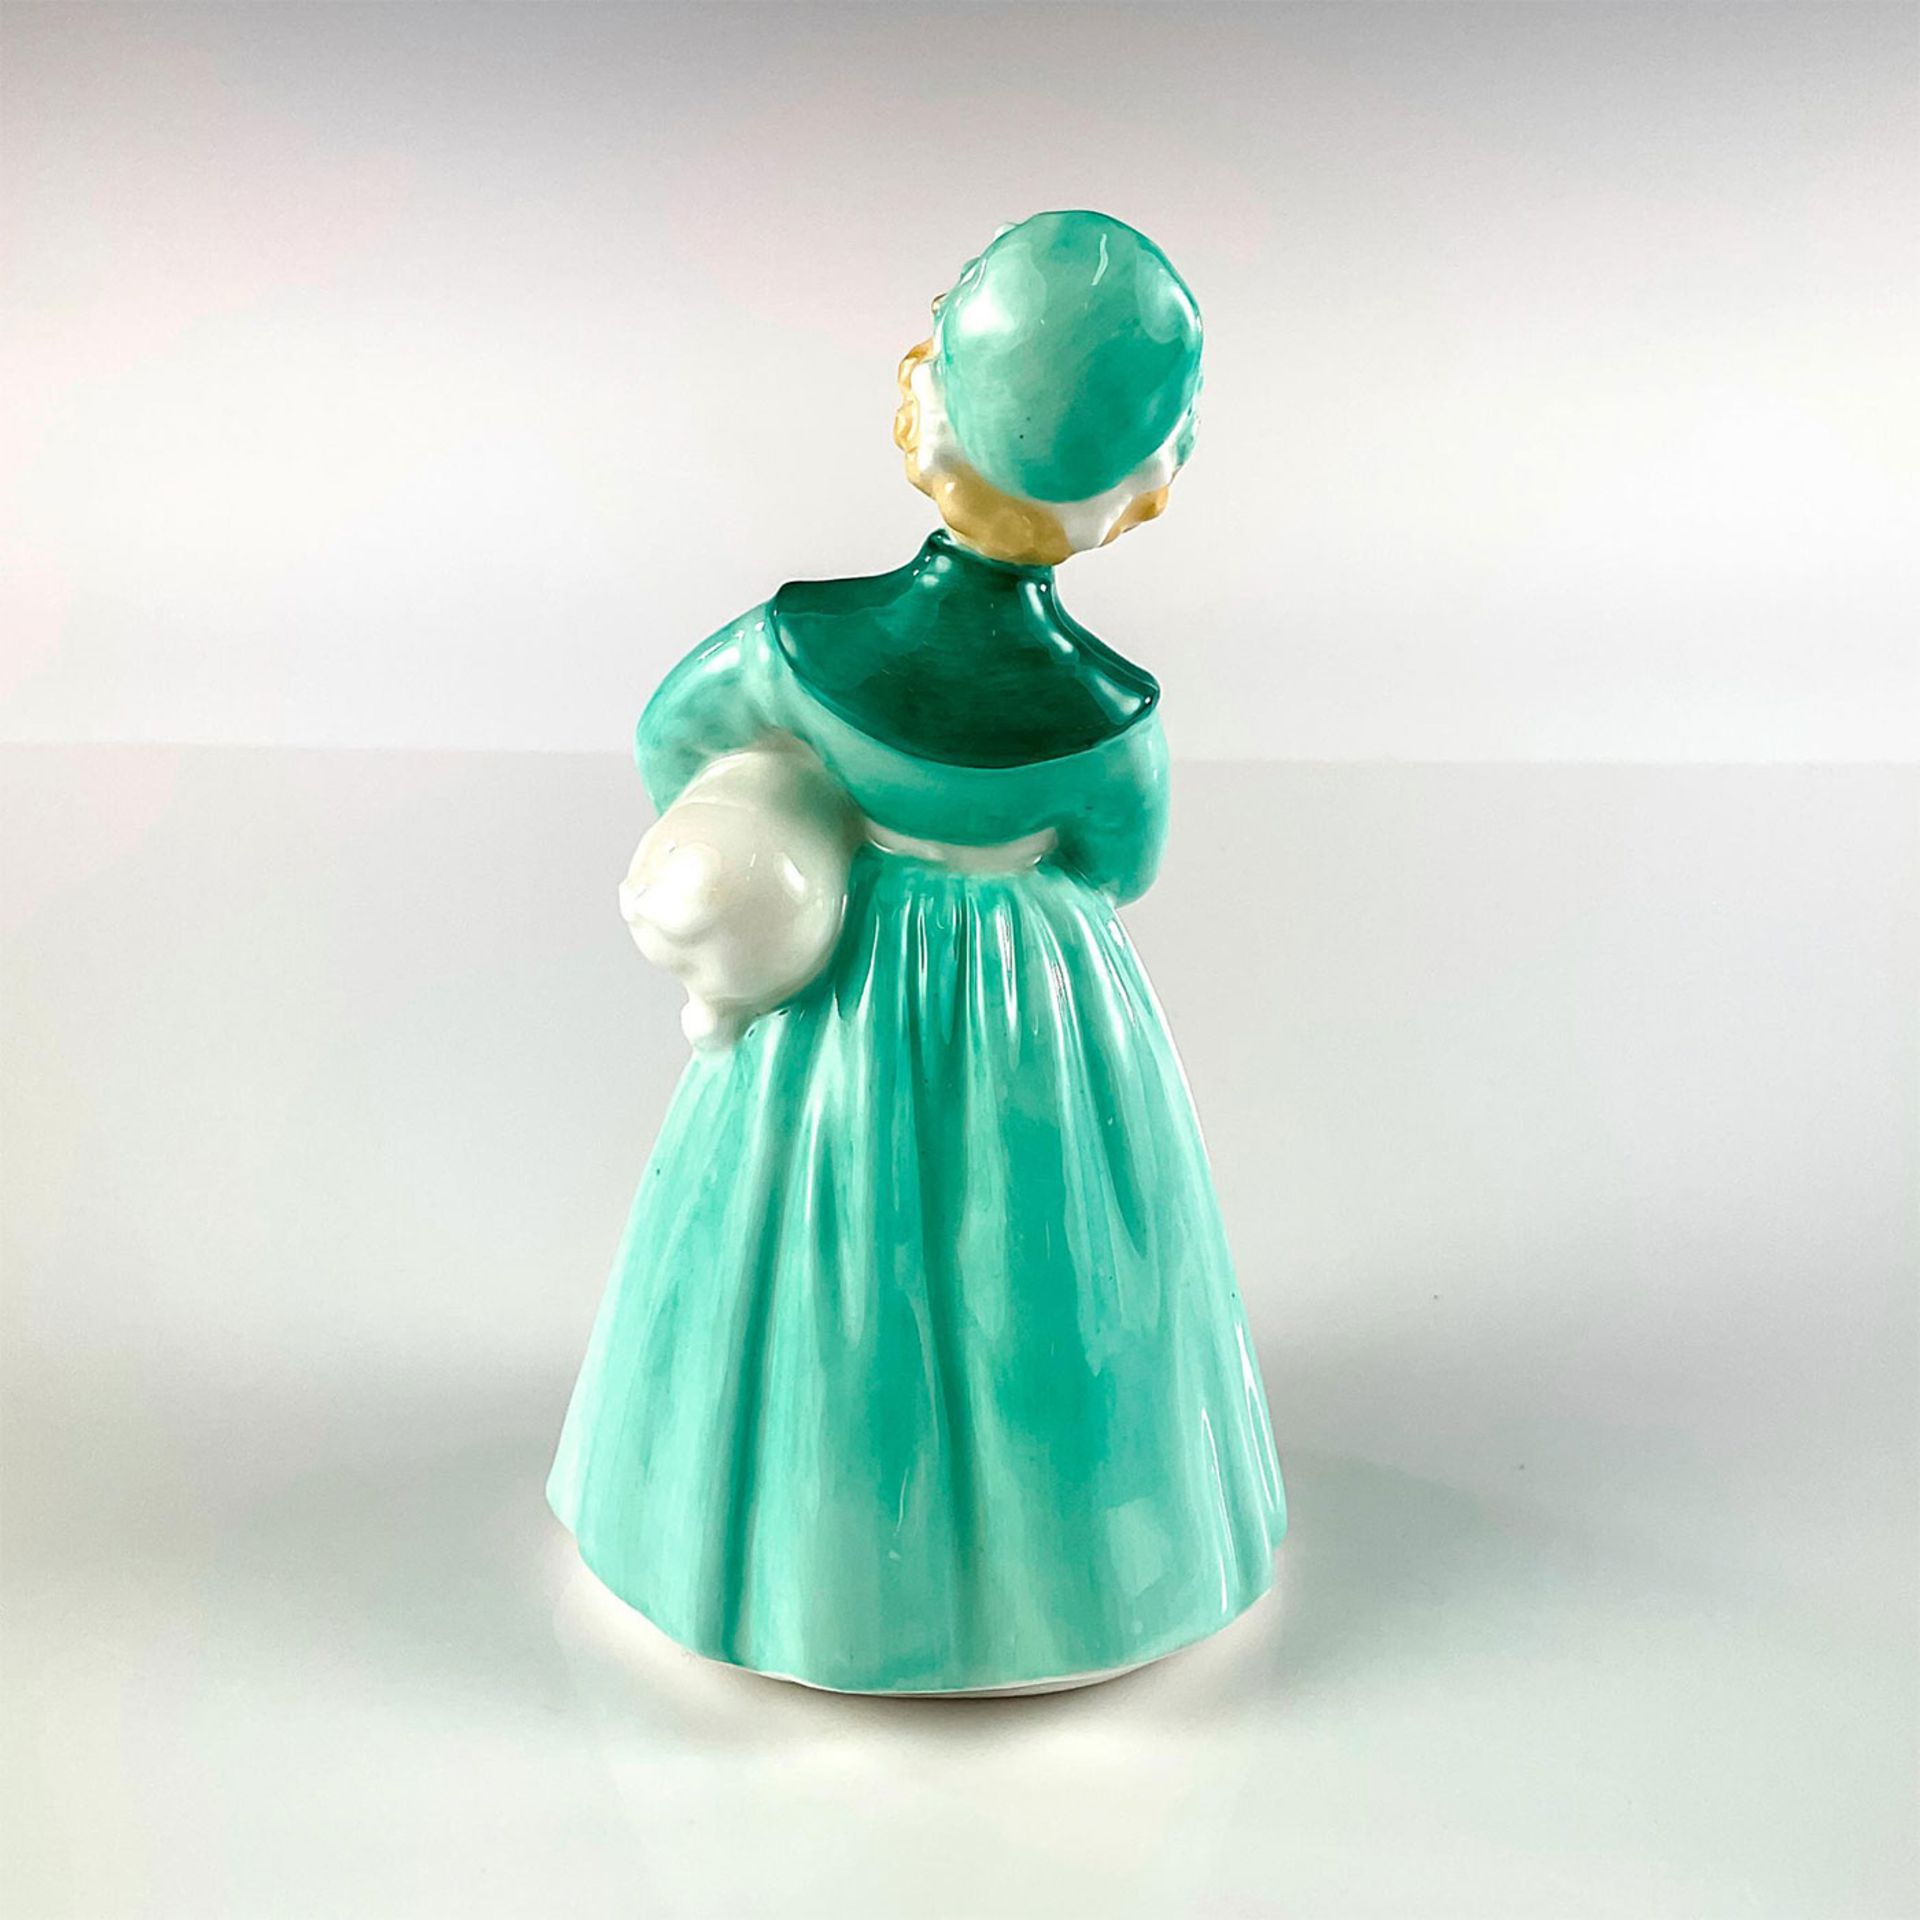 Stayed at Home HN2207 - Royal Doulton Figurine - Image 2 of 3